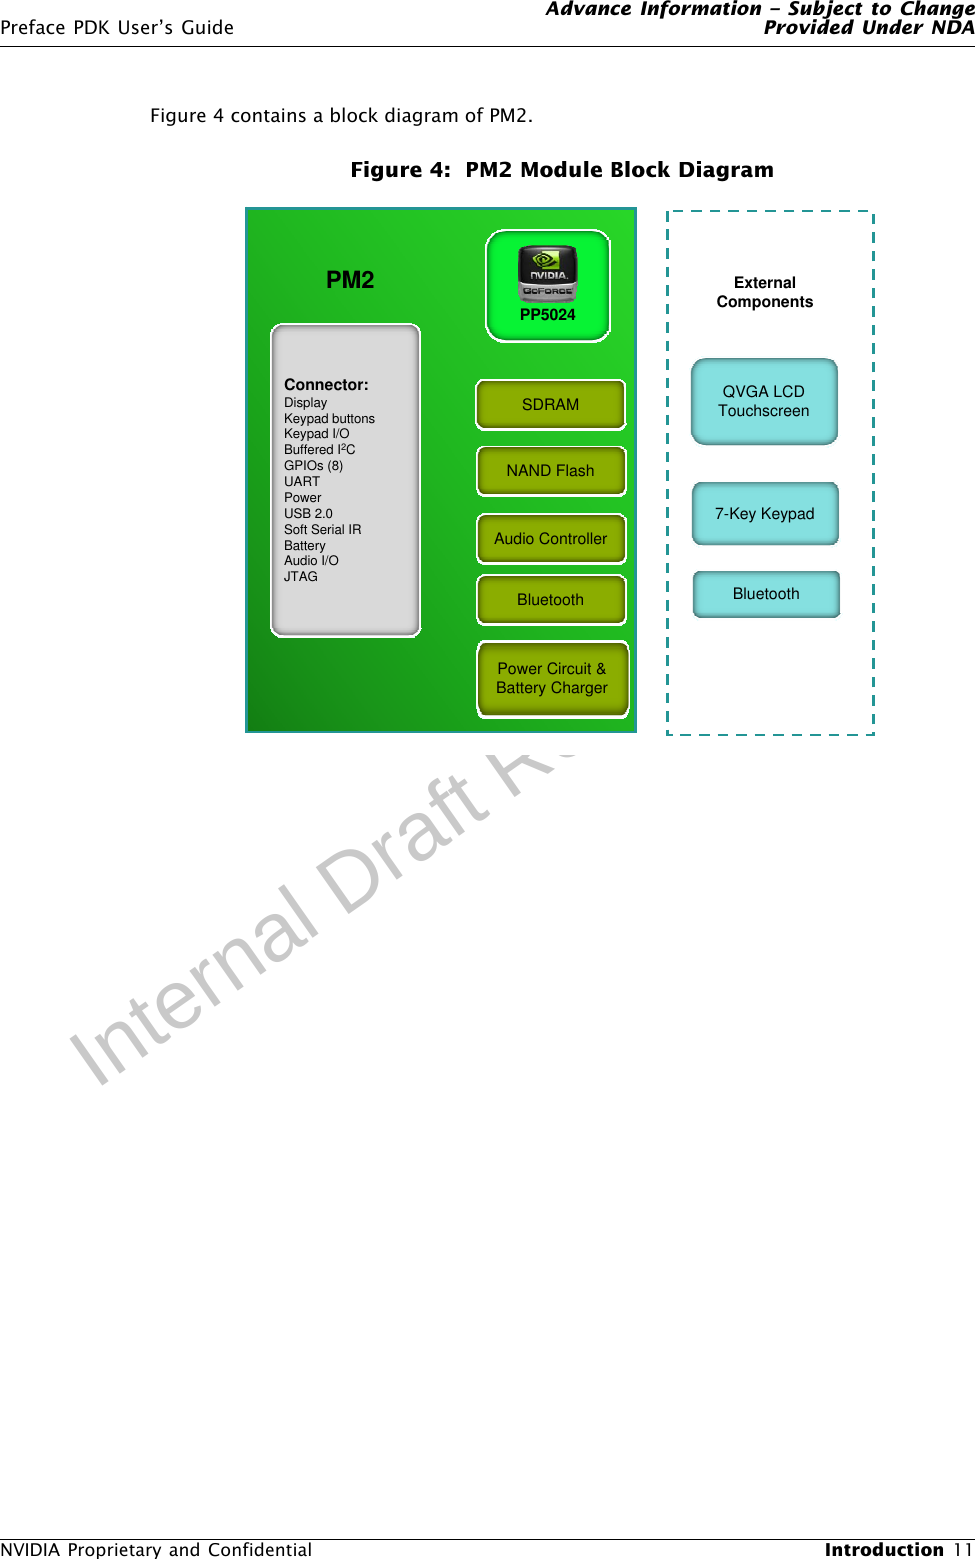 Advance Information – Subject to ChangePreface PDK User’s Guide Provided Under NDANVIDIA Proprietary and Confidential  Introduction 11Internal Draft Review CopyFigure 4 contains a block diagram of PM2.Figure 4:  PM2 Module Block DiagramPP5024SDRAMNAND FlashBluetoothConnector:DisplayKeypad buttonsKeypad I/OBuffered I2CGPIOs (8)UARTPowerUSB 2.0Soft Serial IRBatteryAudio I/OJTAGQVGA LCDTouchscreen7-Key KeypadBluetoothExternalComponentsPM2Power Circuit &amp;Battery ChargerAudio Controller